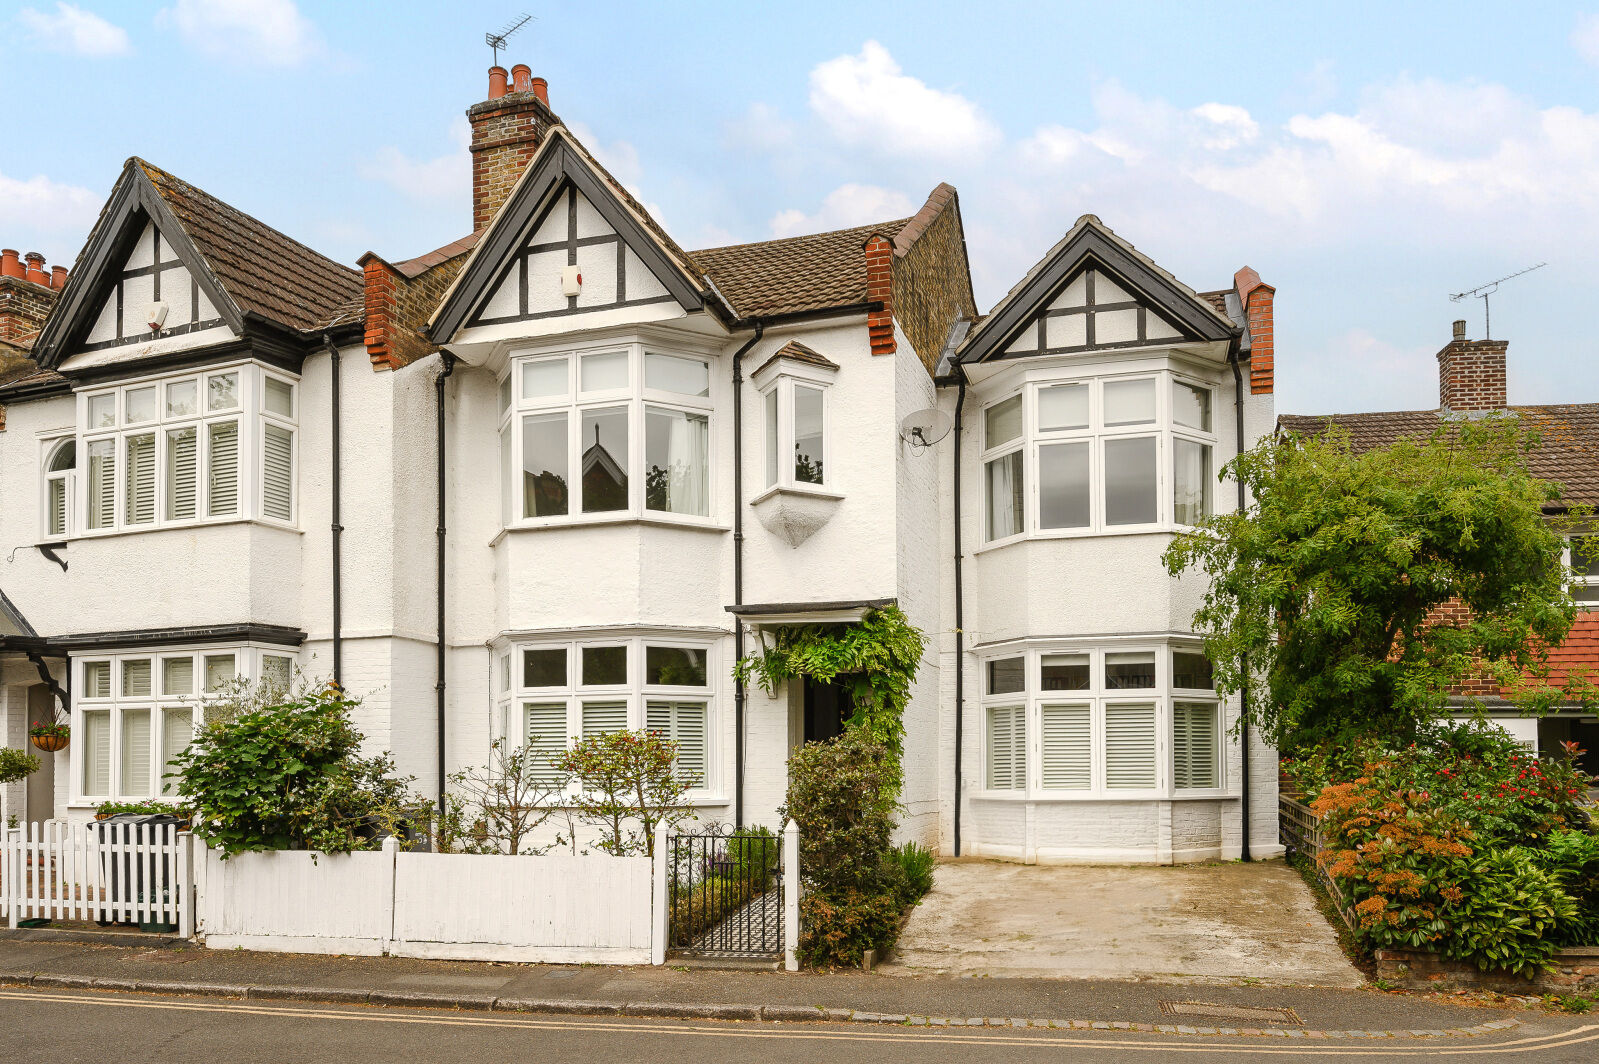 4 bedroom end terraced house to rent, Available now Watery Lane, Wimbledon, SW20, main image